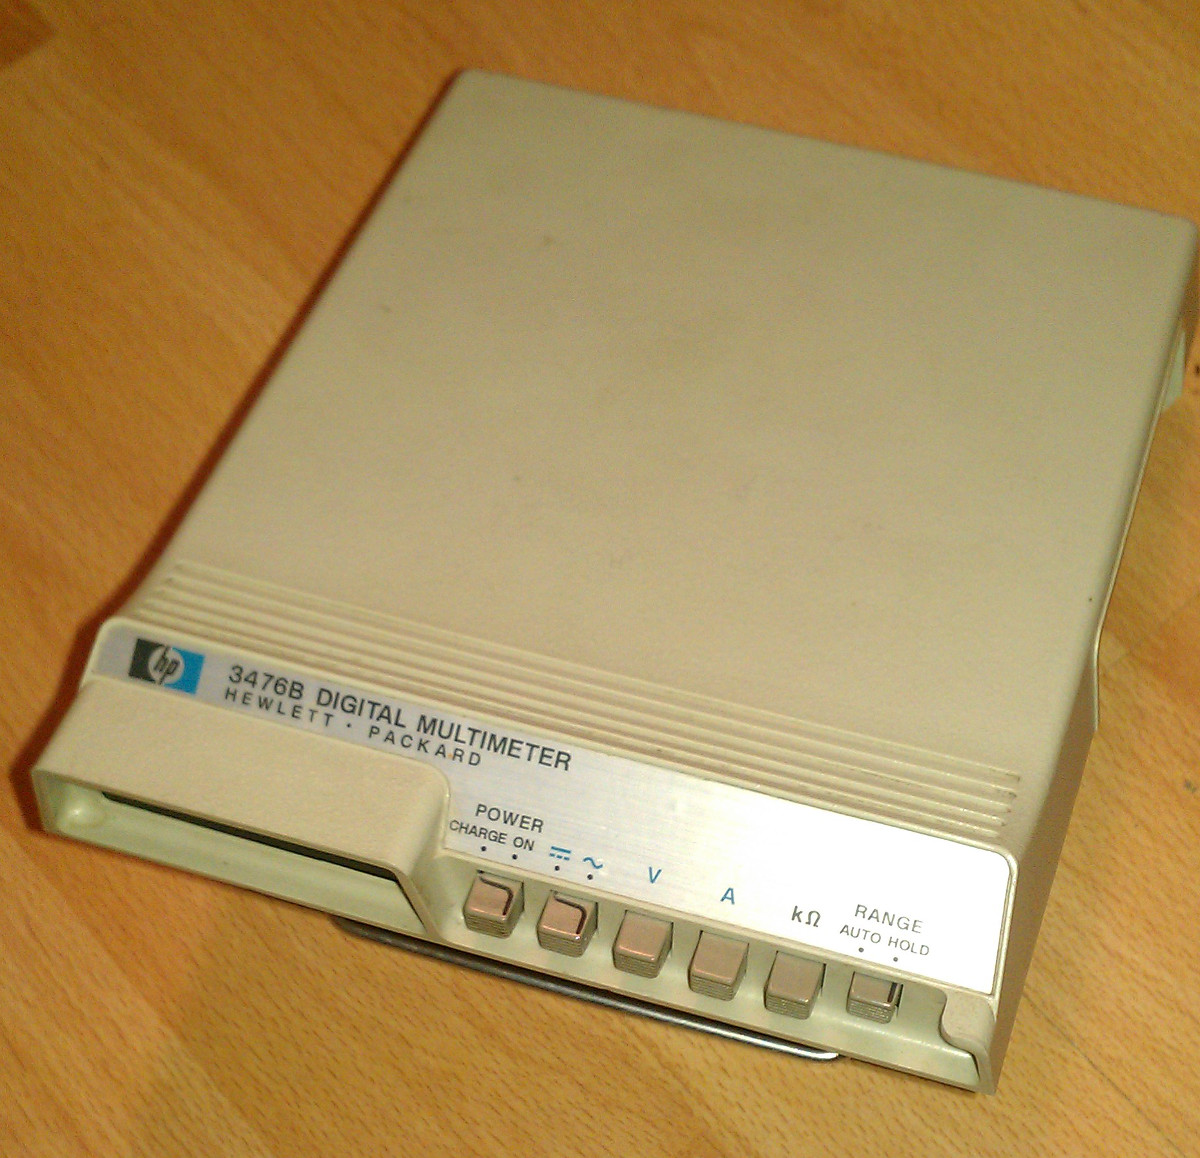 The main body of the HP 3476B DMM